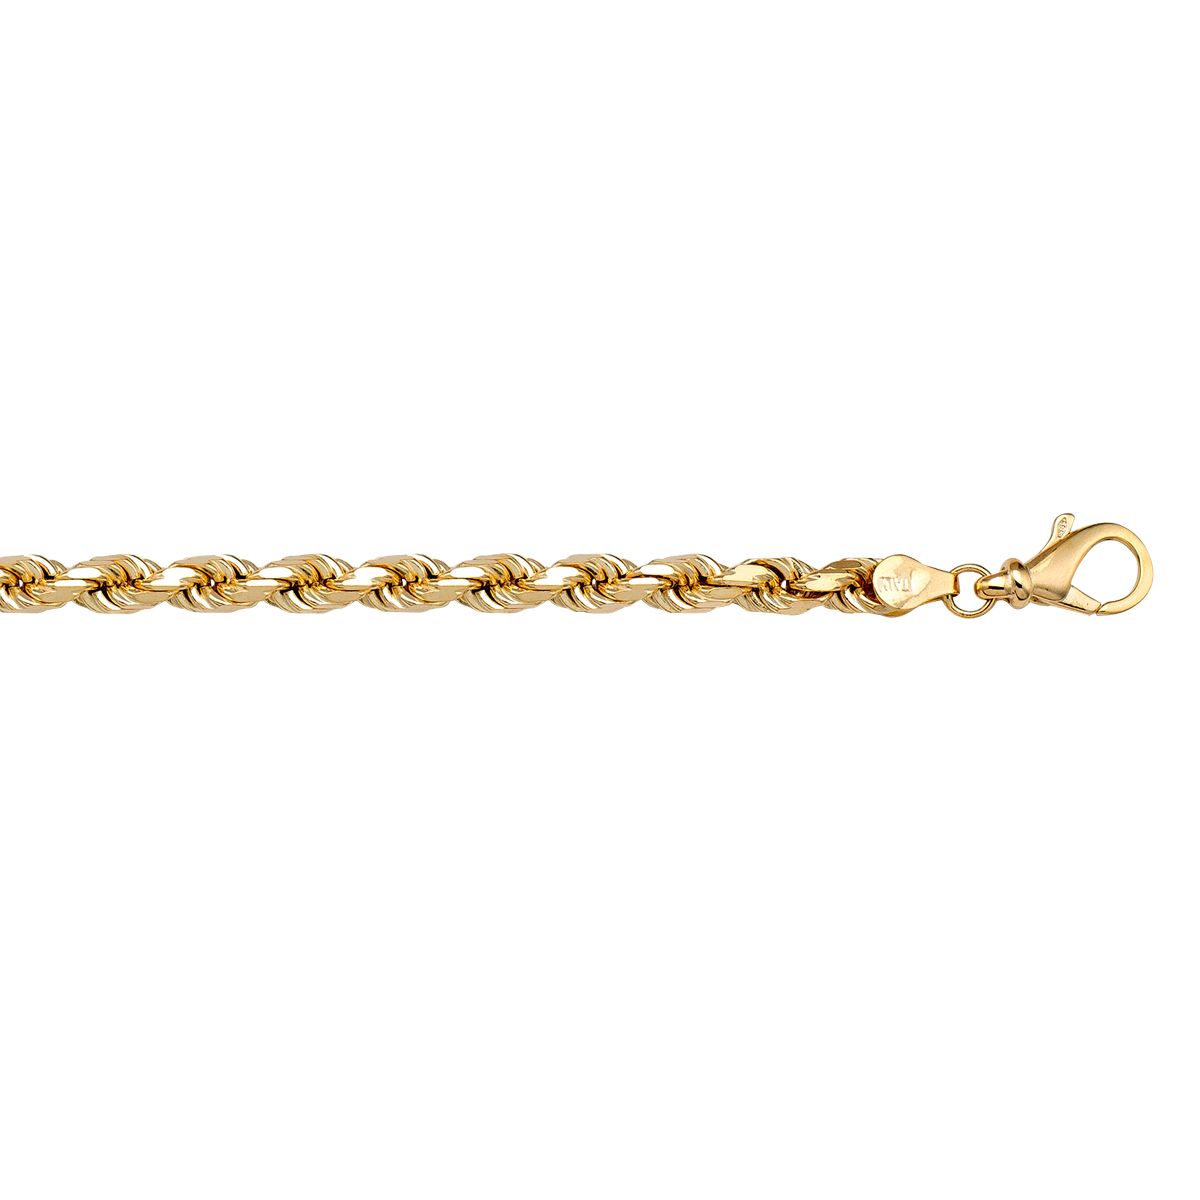 CROP02, Gold Chain, Diamond Cut Rope, Yellow Gold, 3.3 to 5.0 mm